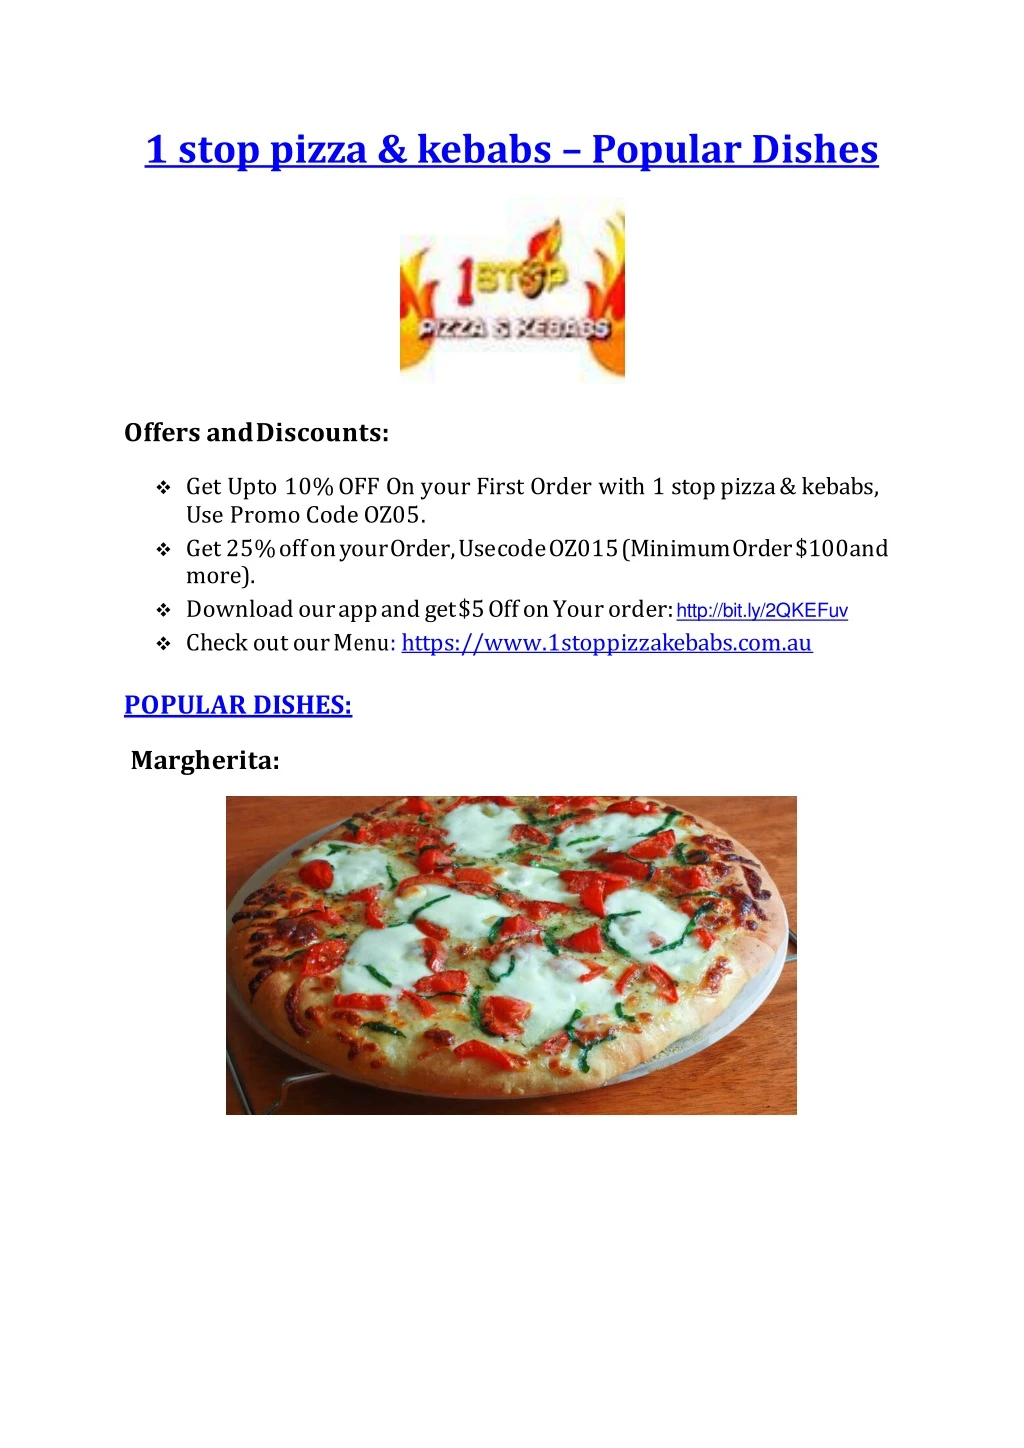 1 stop pizza kebabs popular dishes